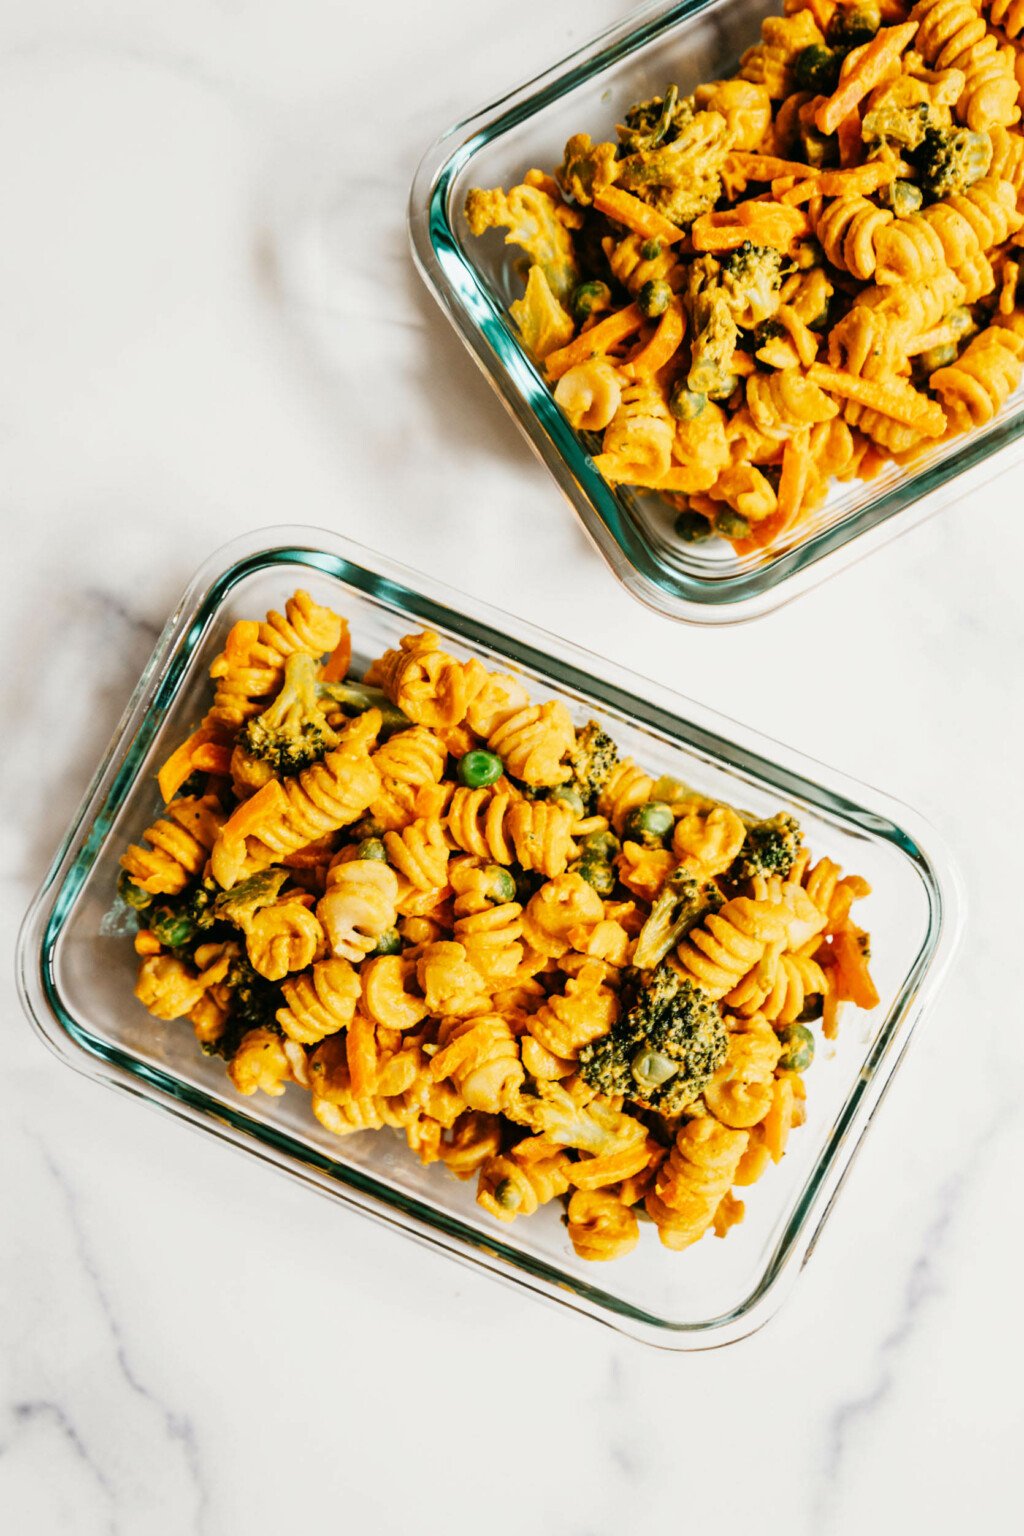 Two matching storage containers are filled with pasta salad—one of many easy vegan meal prep lunch ideas.